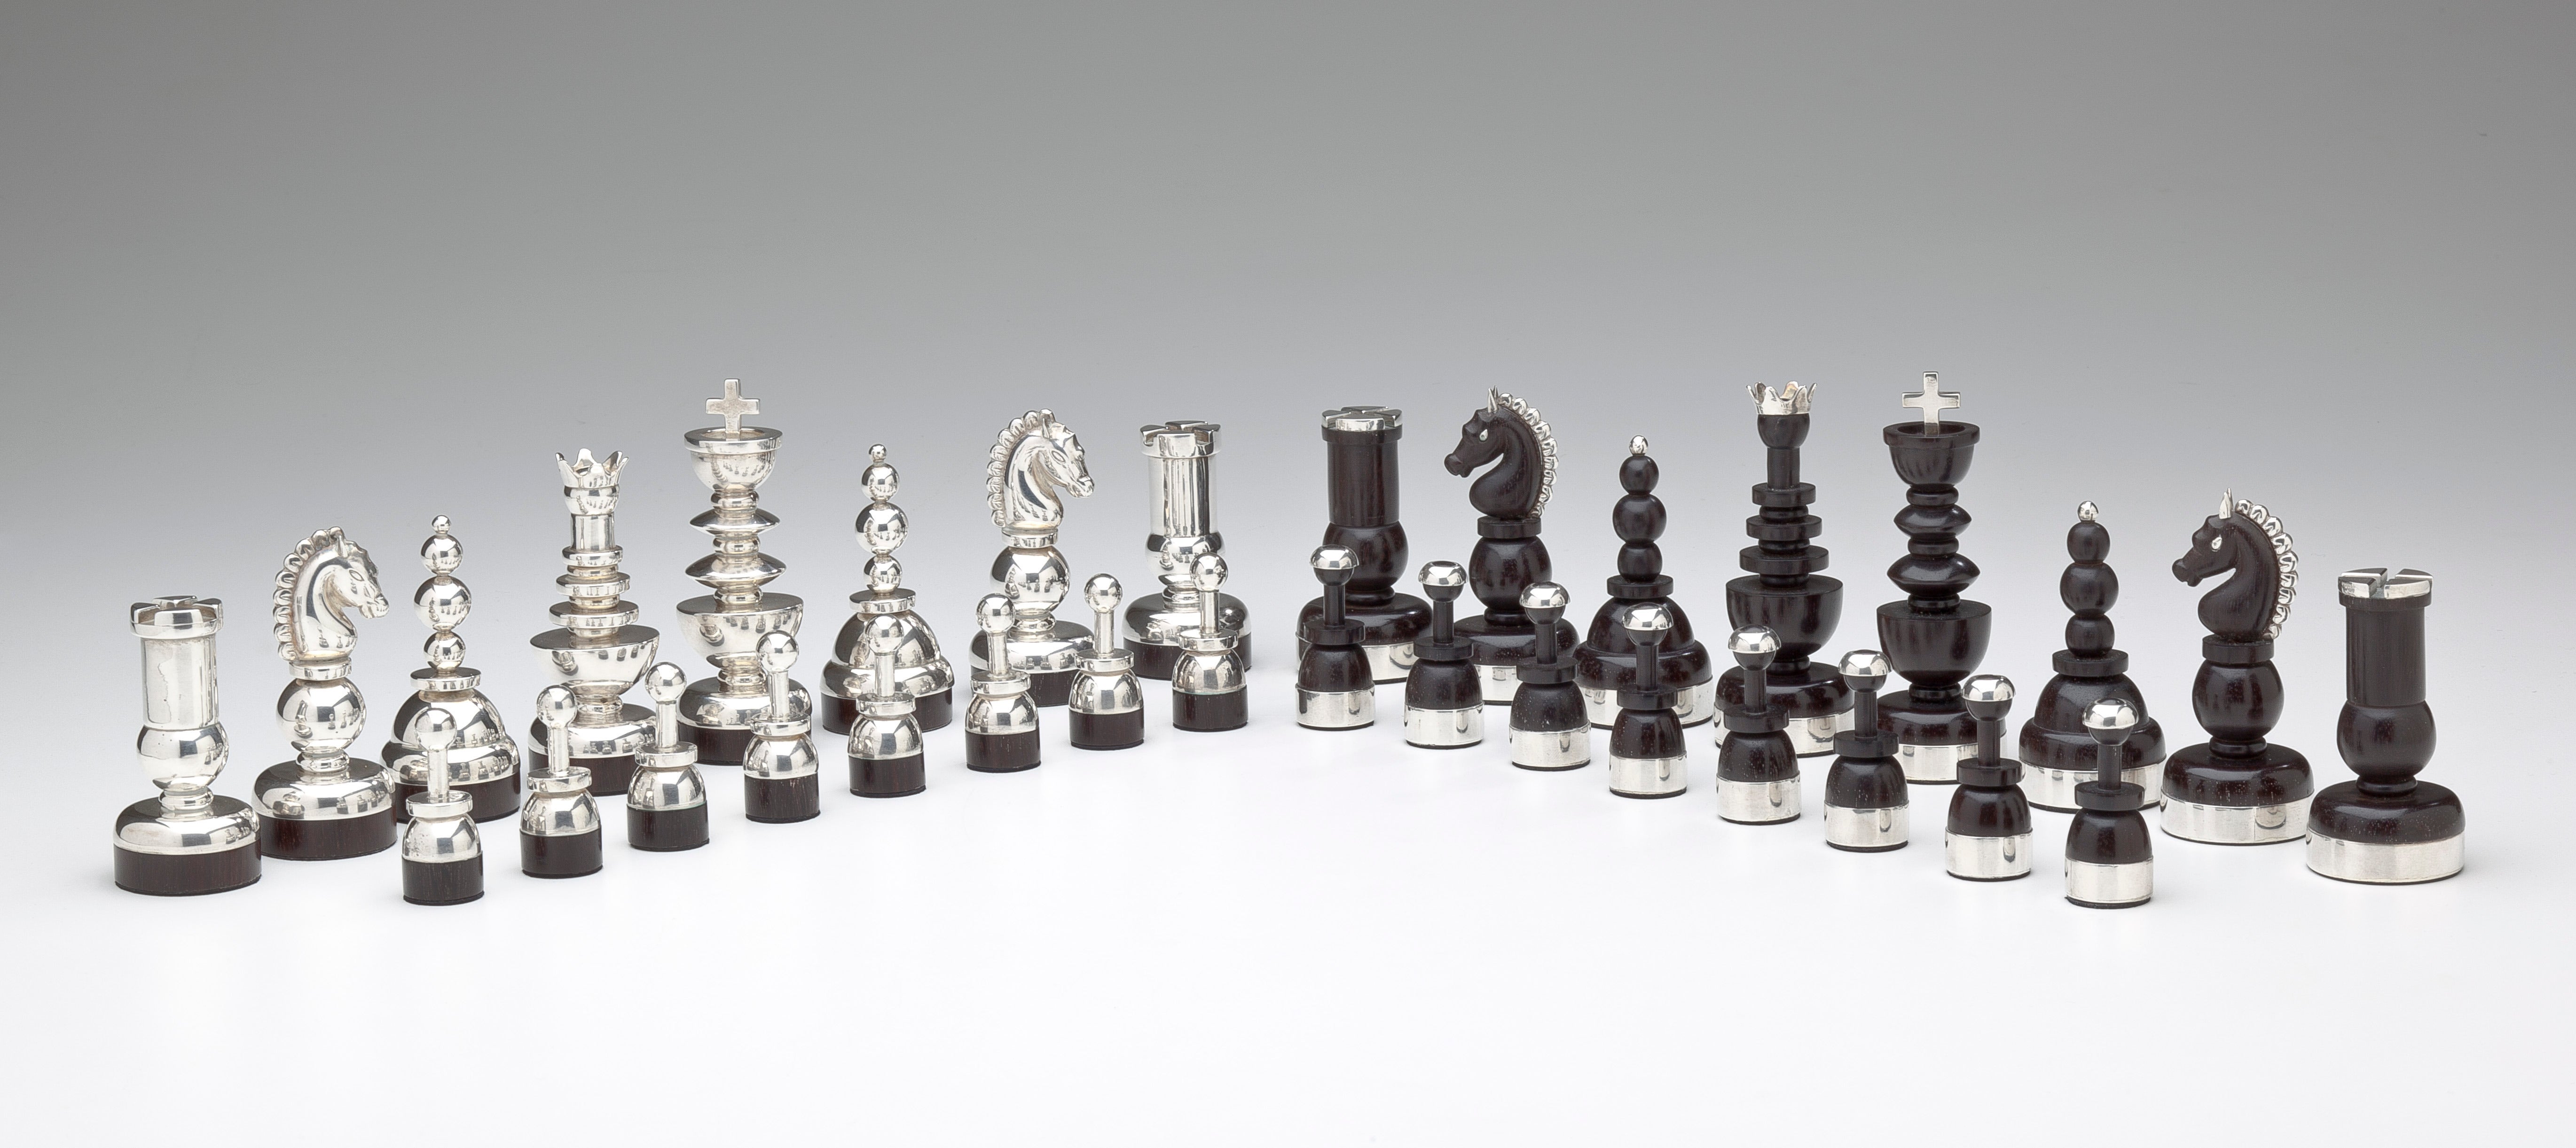 Hector Aguilar Chess Set